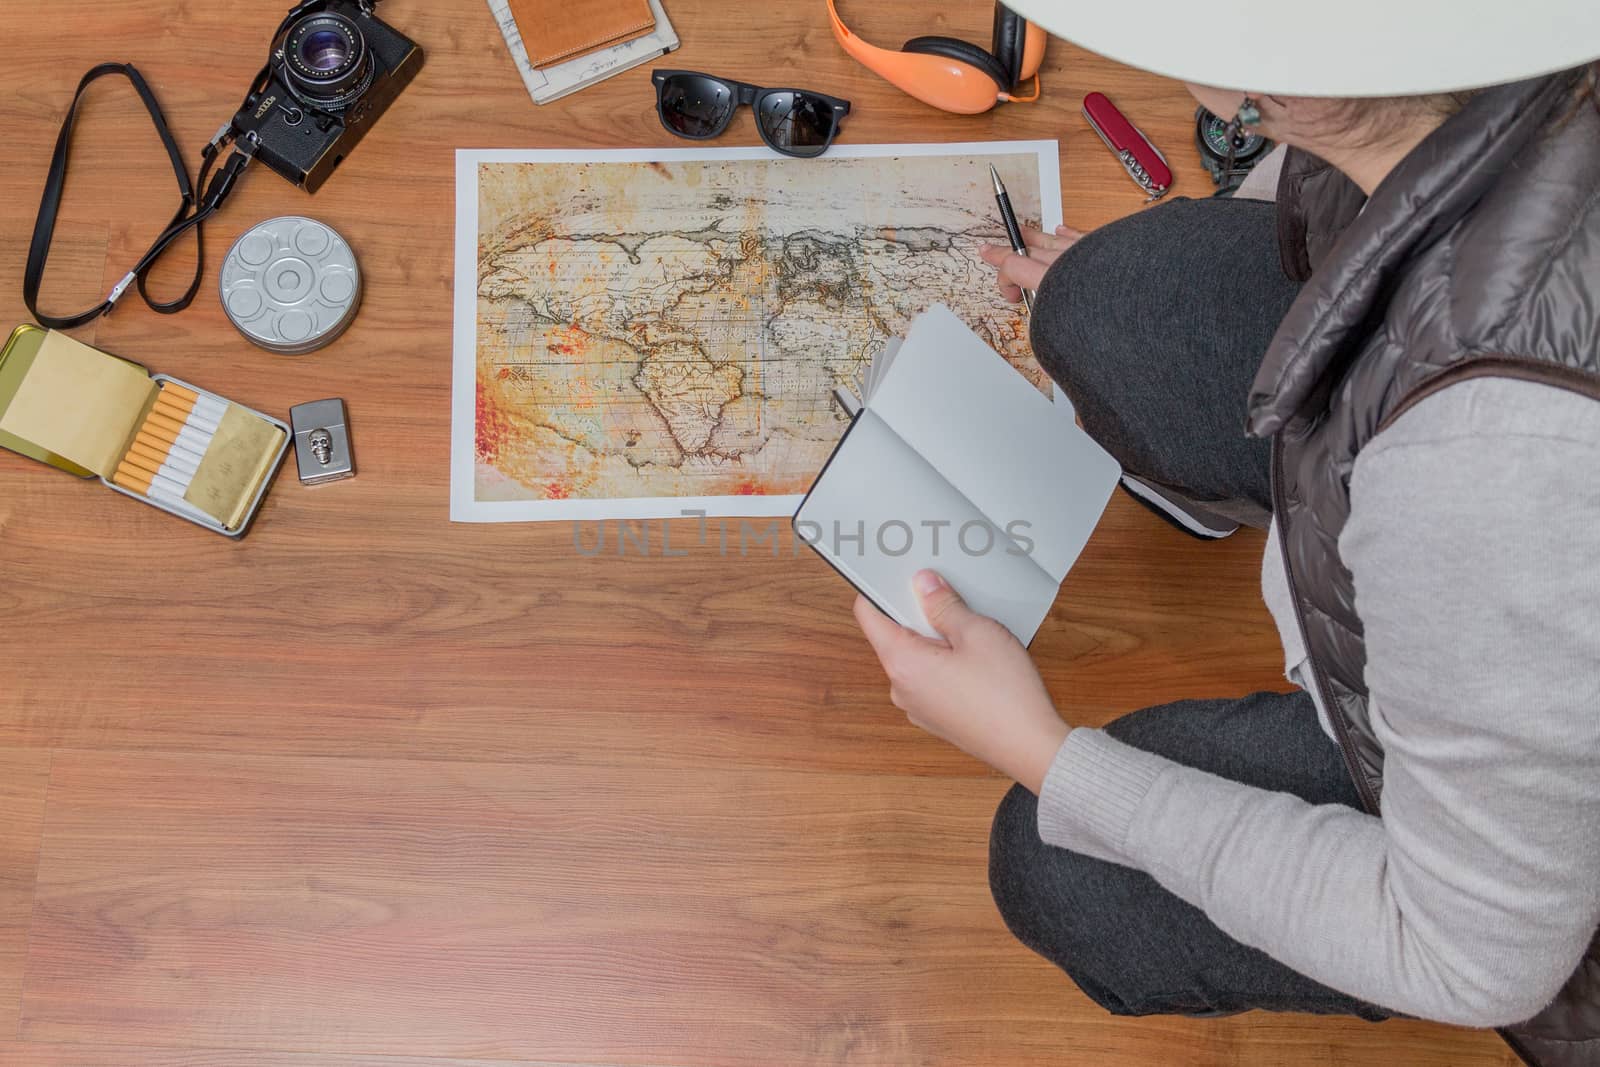 Lady planing a trip with a map and travel assets